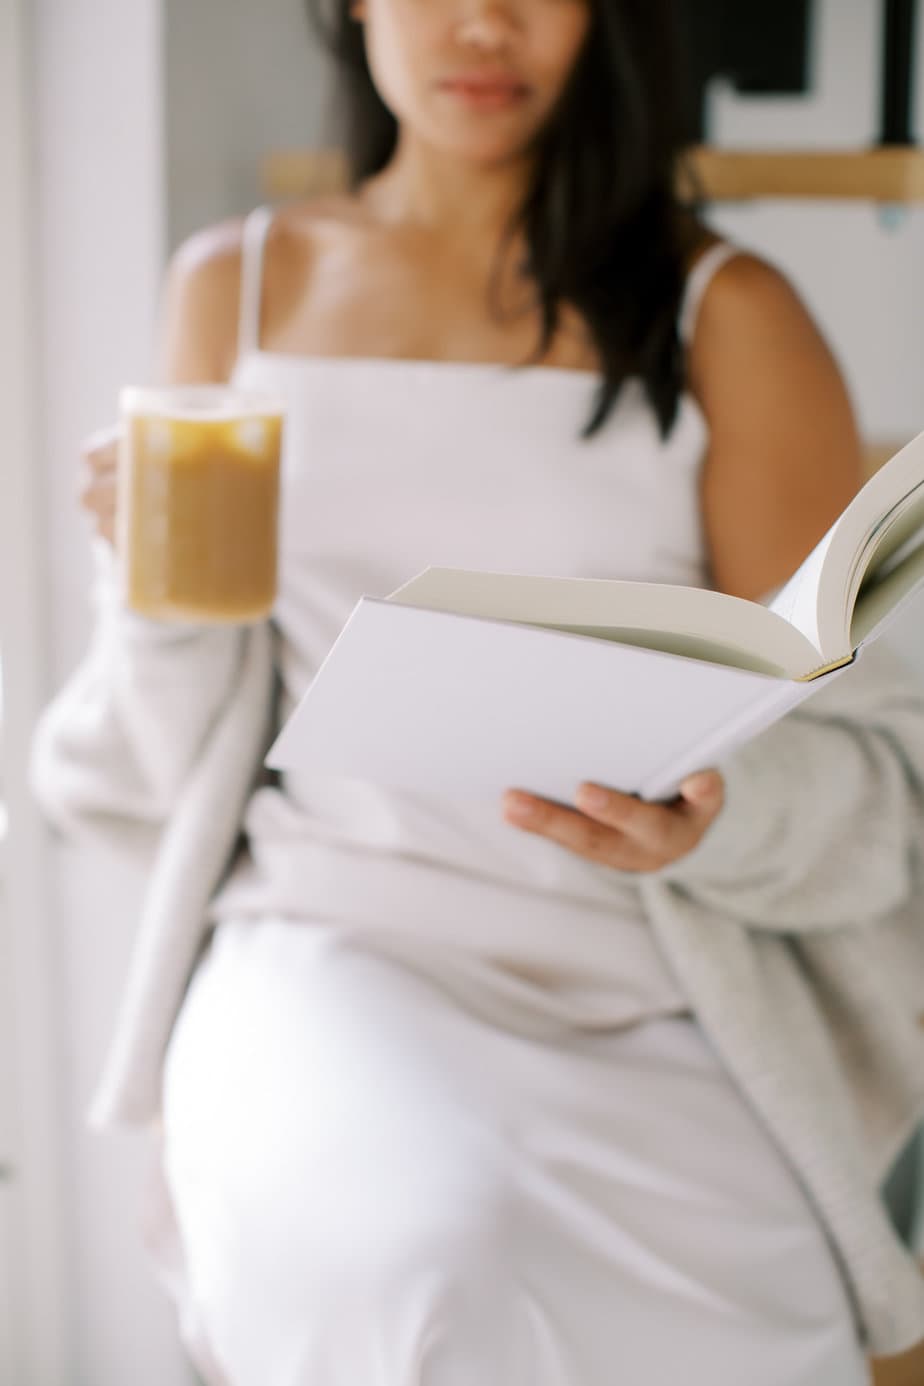 The Best Books for Finding your Purpose